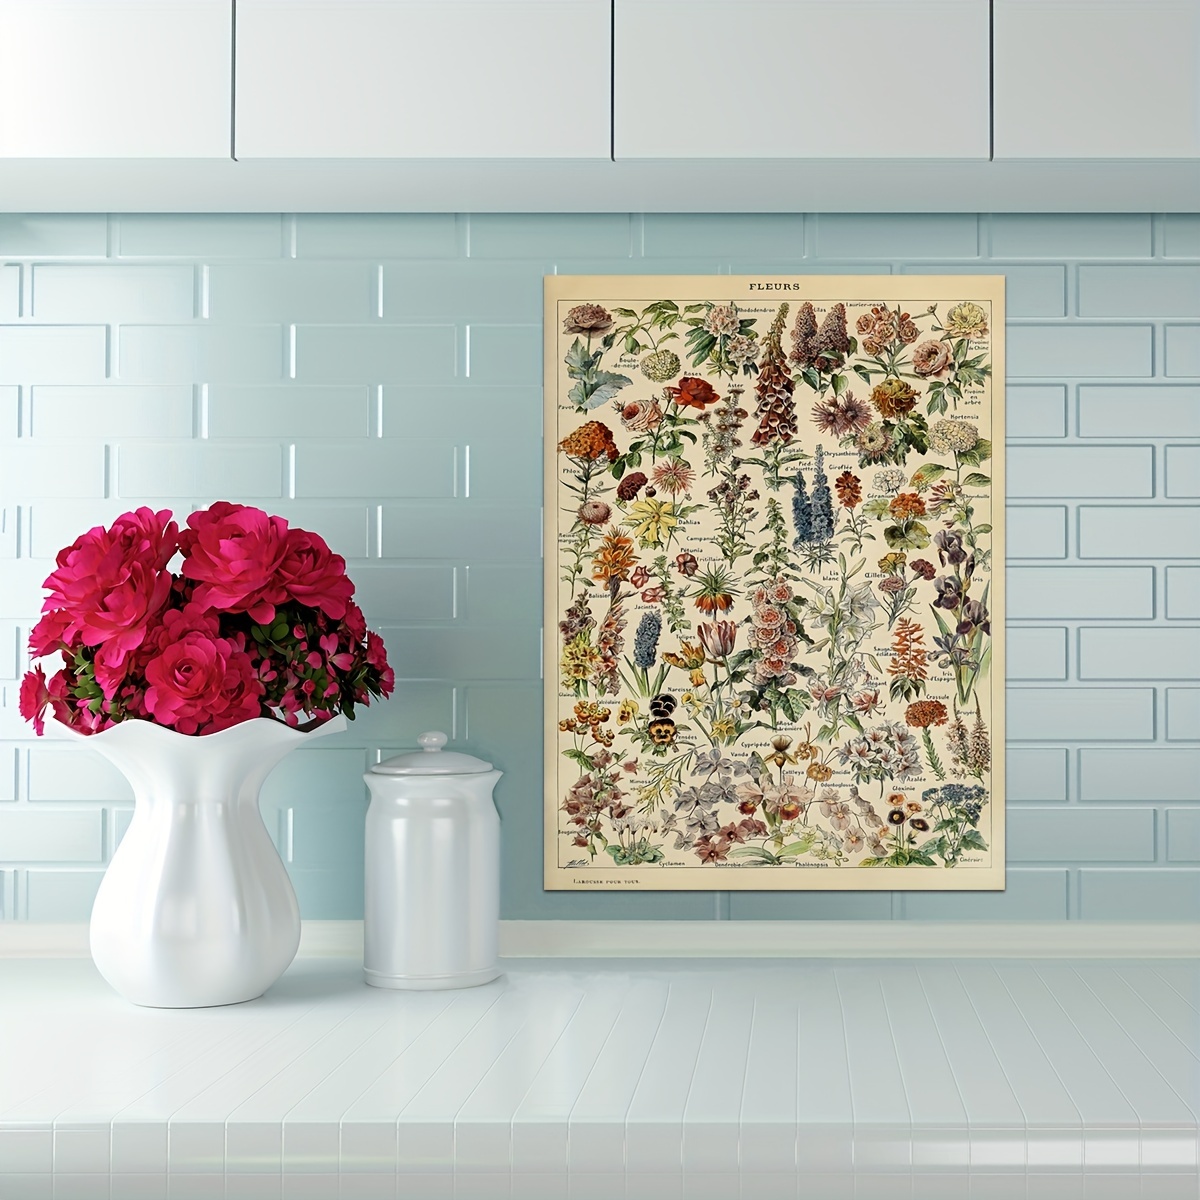 Vintage Botanical Plant Wall Art Flower Poster Prints Decor, Rustic  Wildflowers Posters Wall Art Cottagecore Fairycore Room Decor, Herbarium  Posters